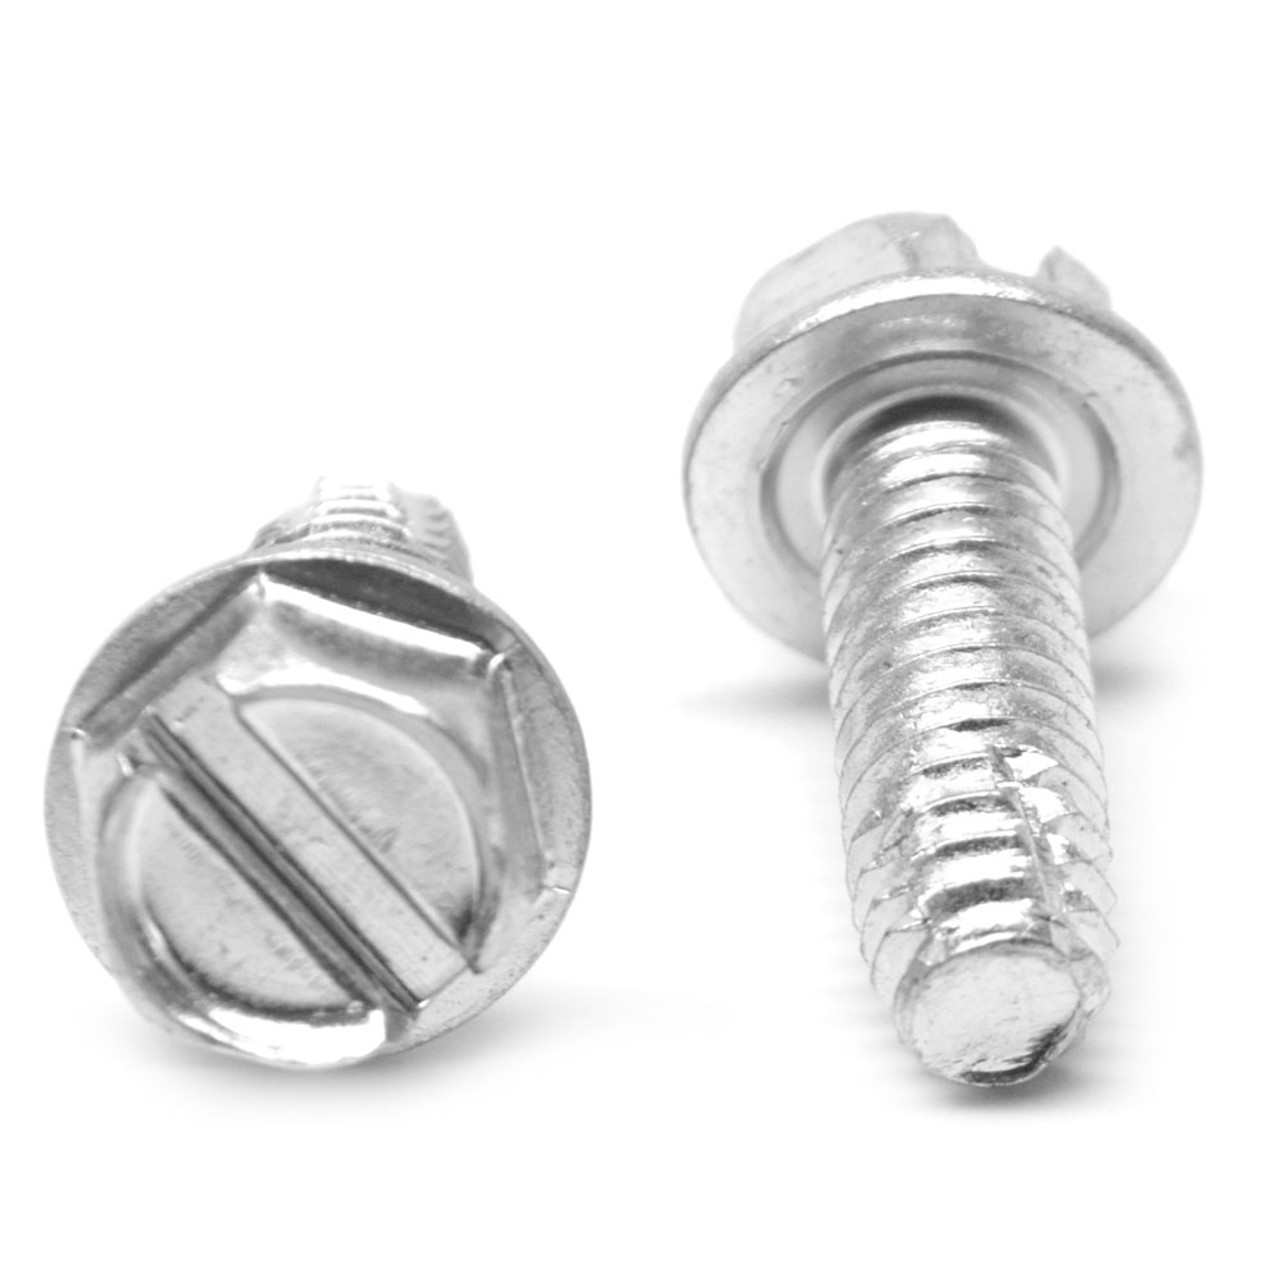 1/4-20 x 1 1/4 Coarse Thread Thread Cutting Screw Slotted Hex Washer Head Type F Stainless Steel 18-8